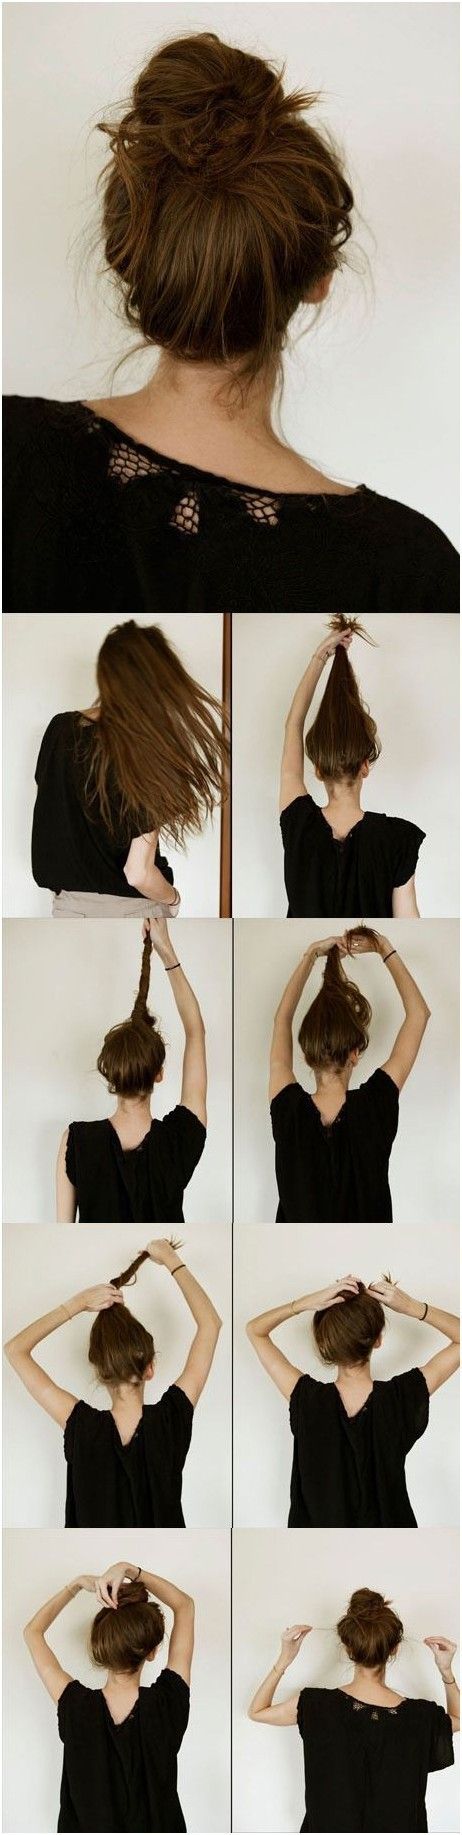 1470507461 everyday hairstyles tutorials casual messy bun hairstyle